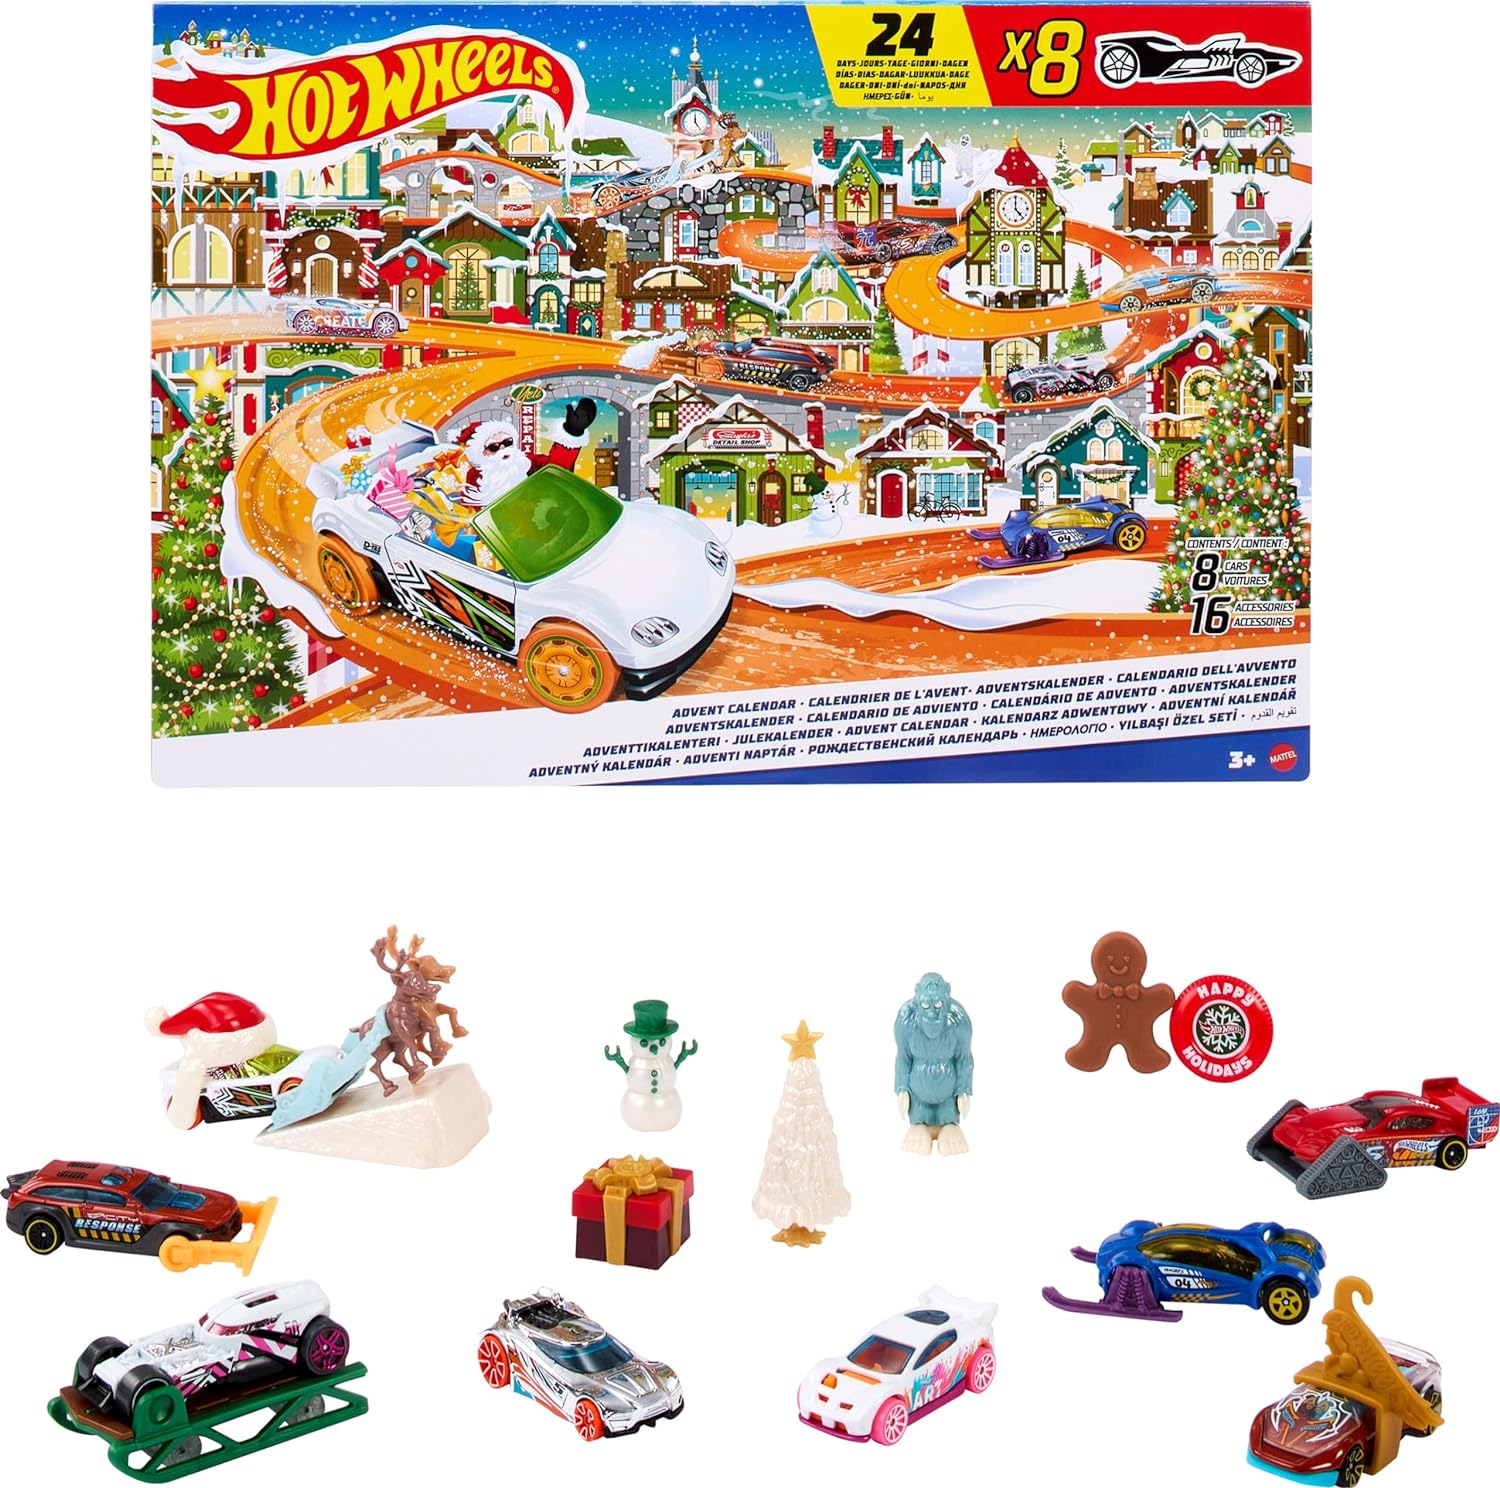 Hot Wheels Advent Calendar 2023 - 8 Hot Wheels Cars and 16 Winter Accessories Behind 24 Numbered Doors, Includes Play Mat, For Children and Hot Wheels Fans, HKL74